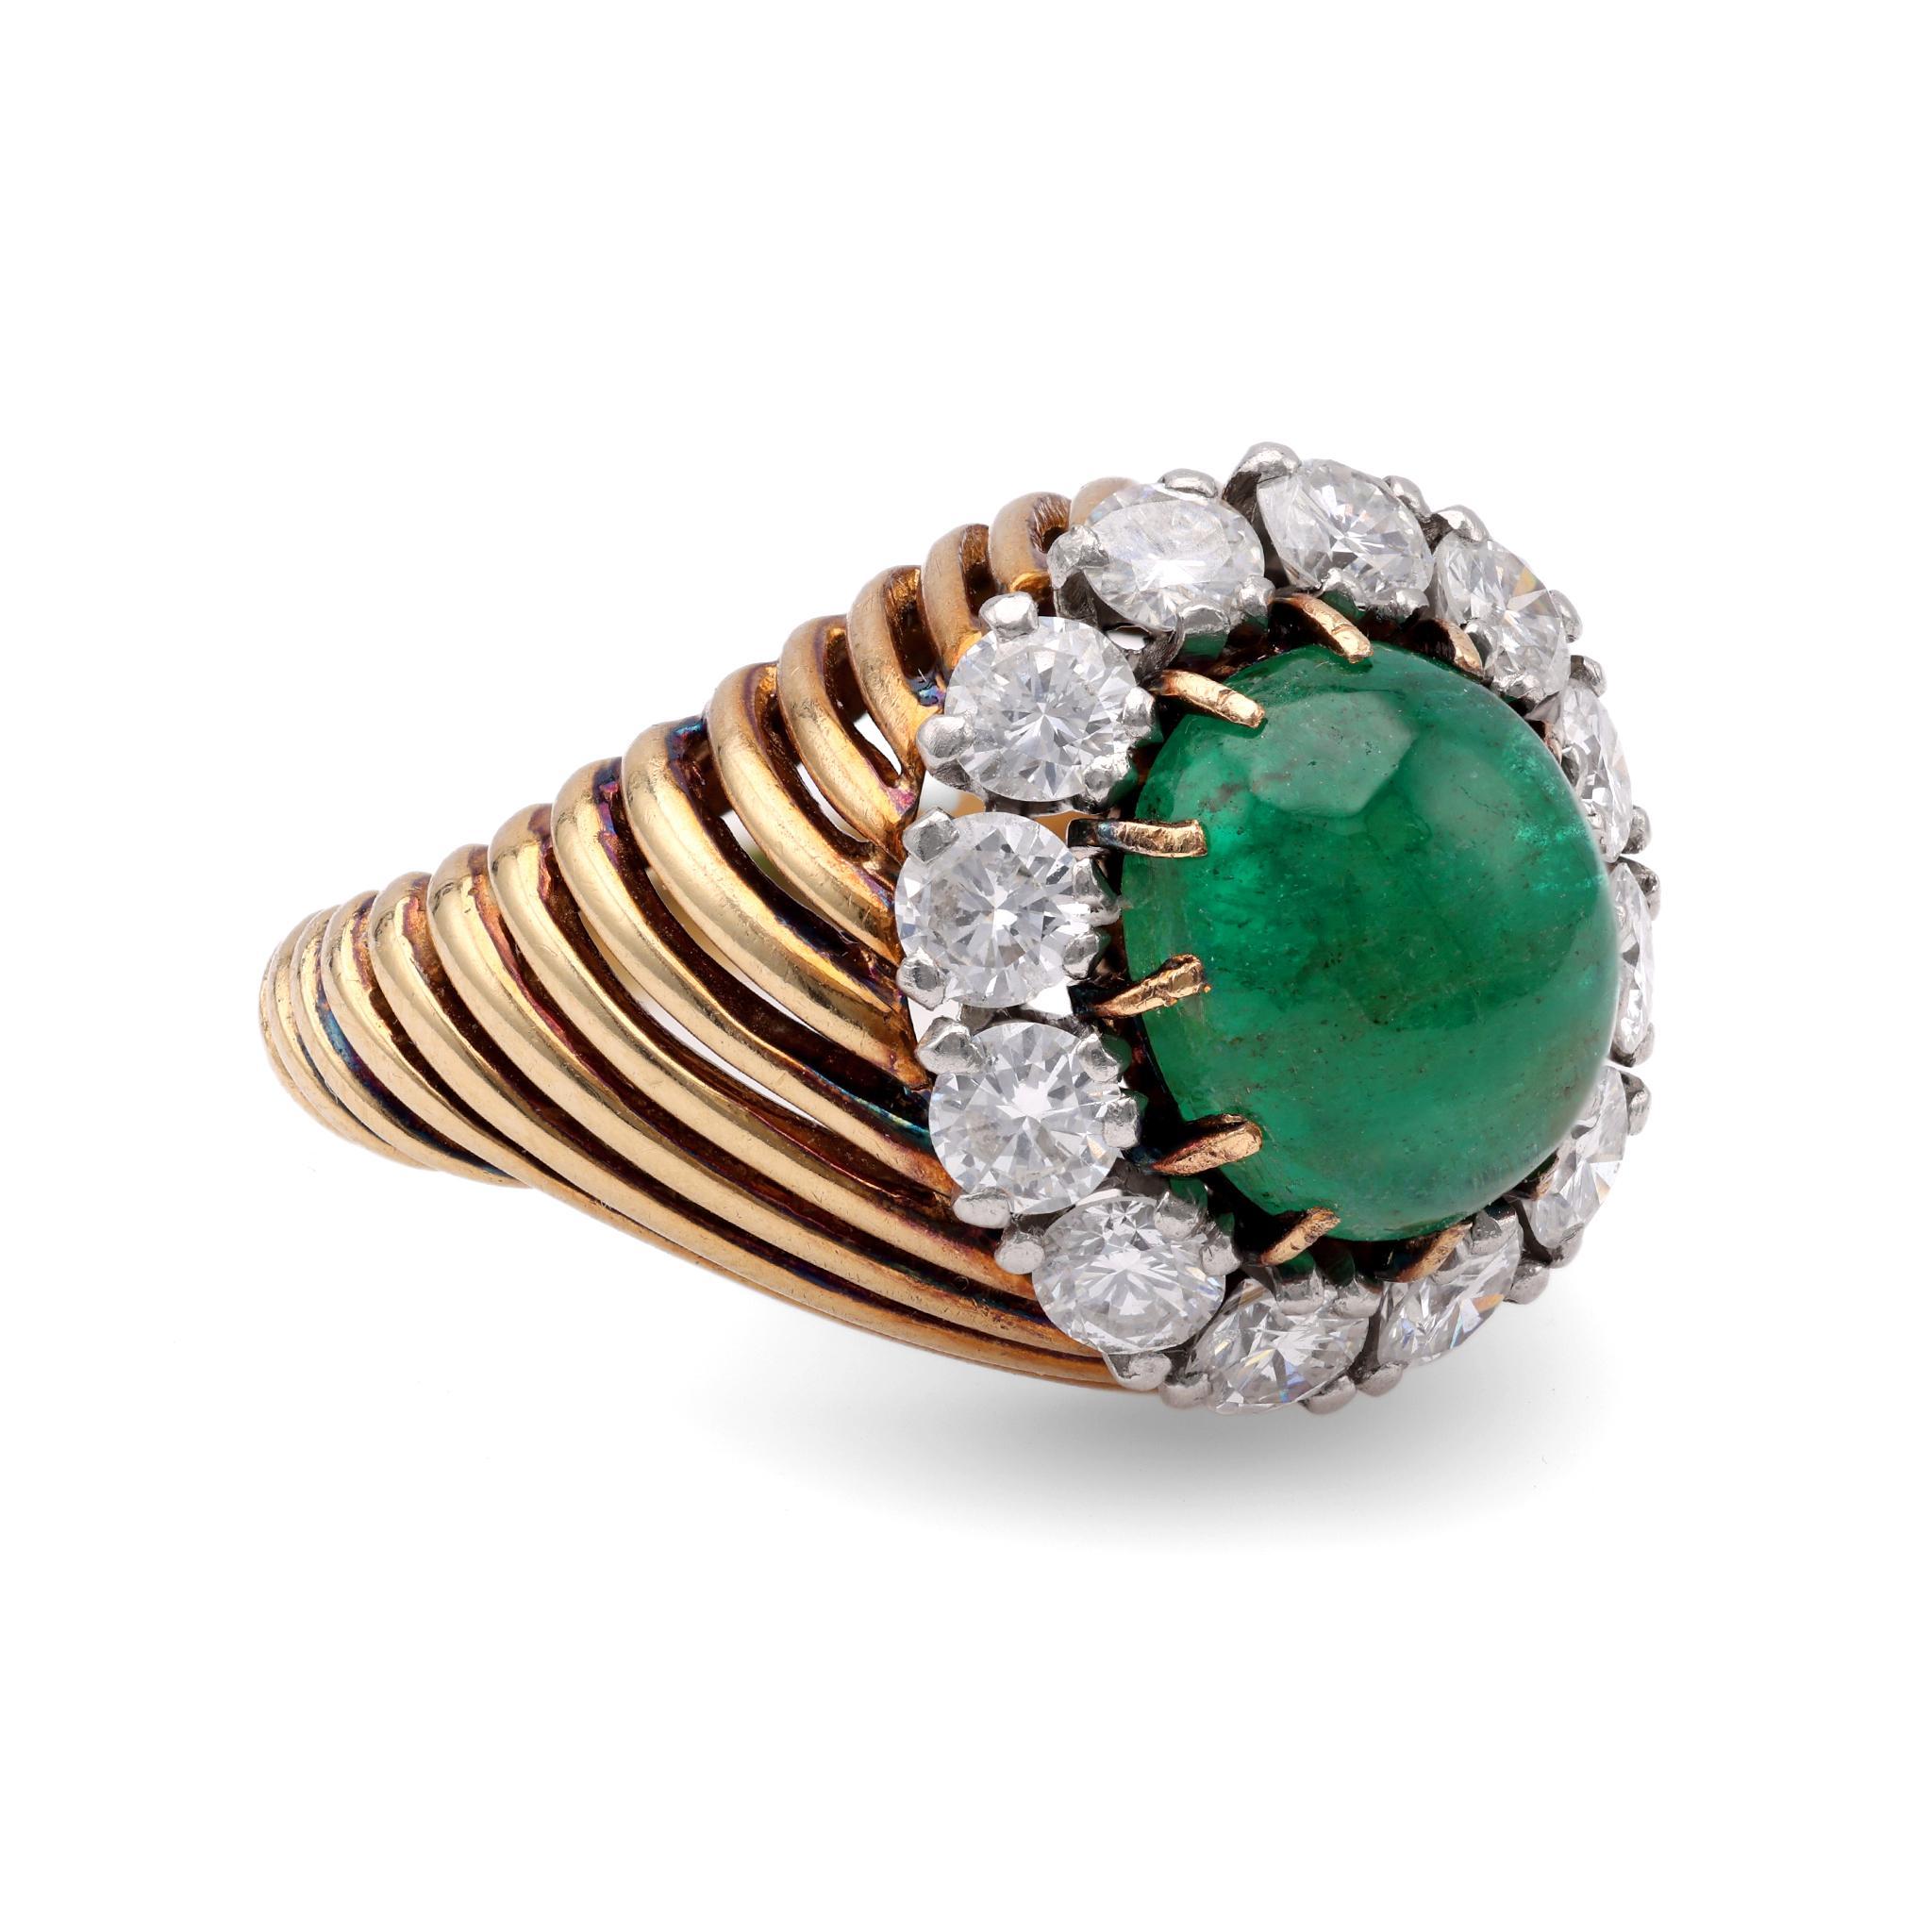 Cabochon Vintage Van Cleef & Arpels French Emerald Diamond 18k Yellow Gold Ring